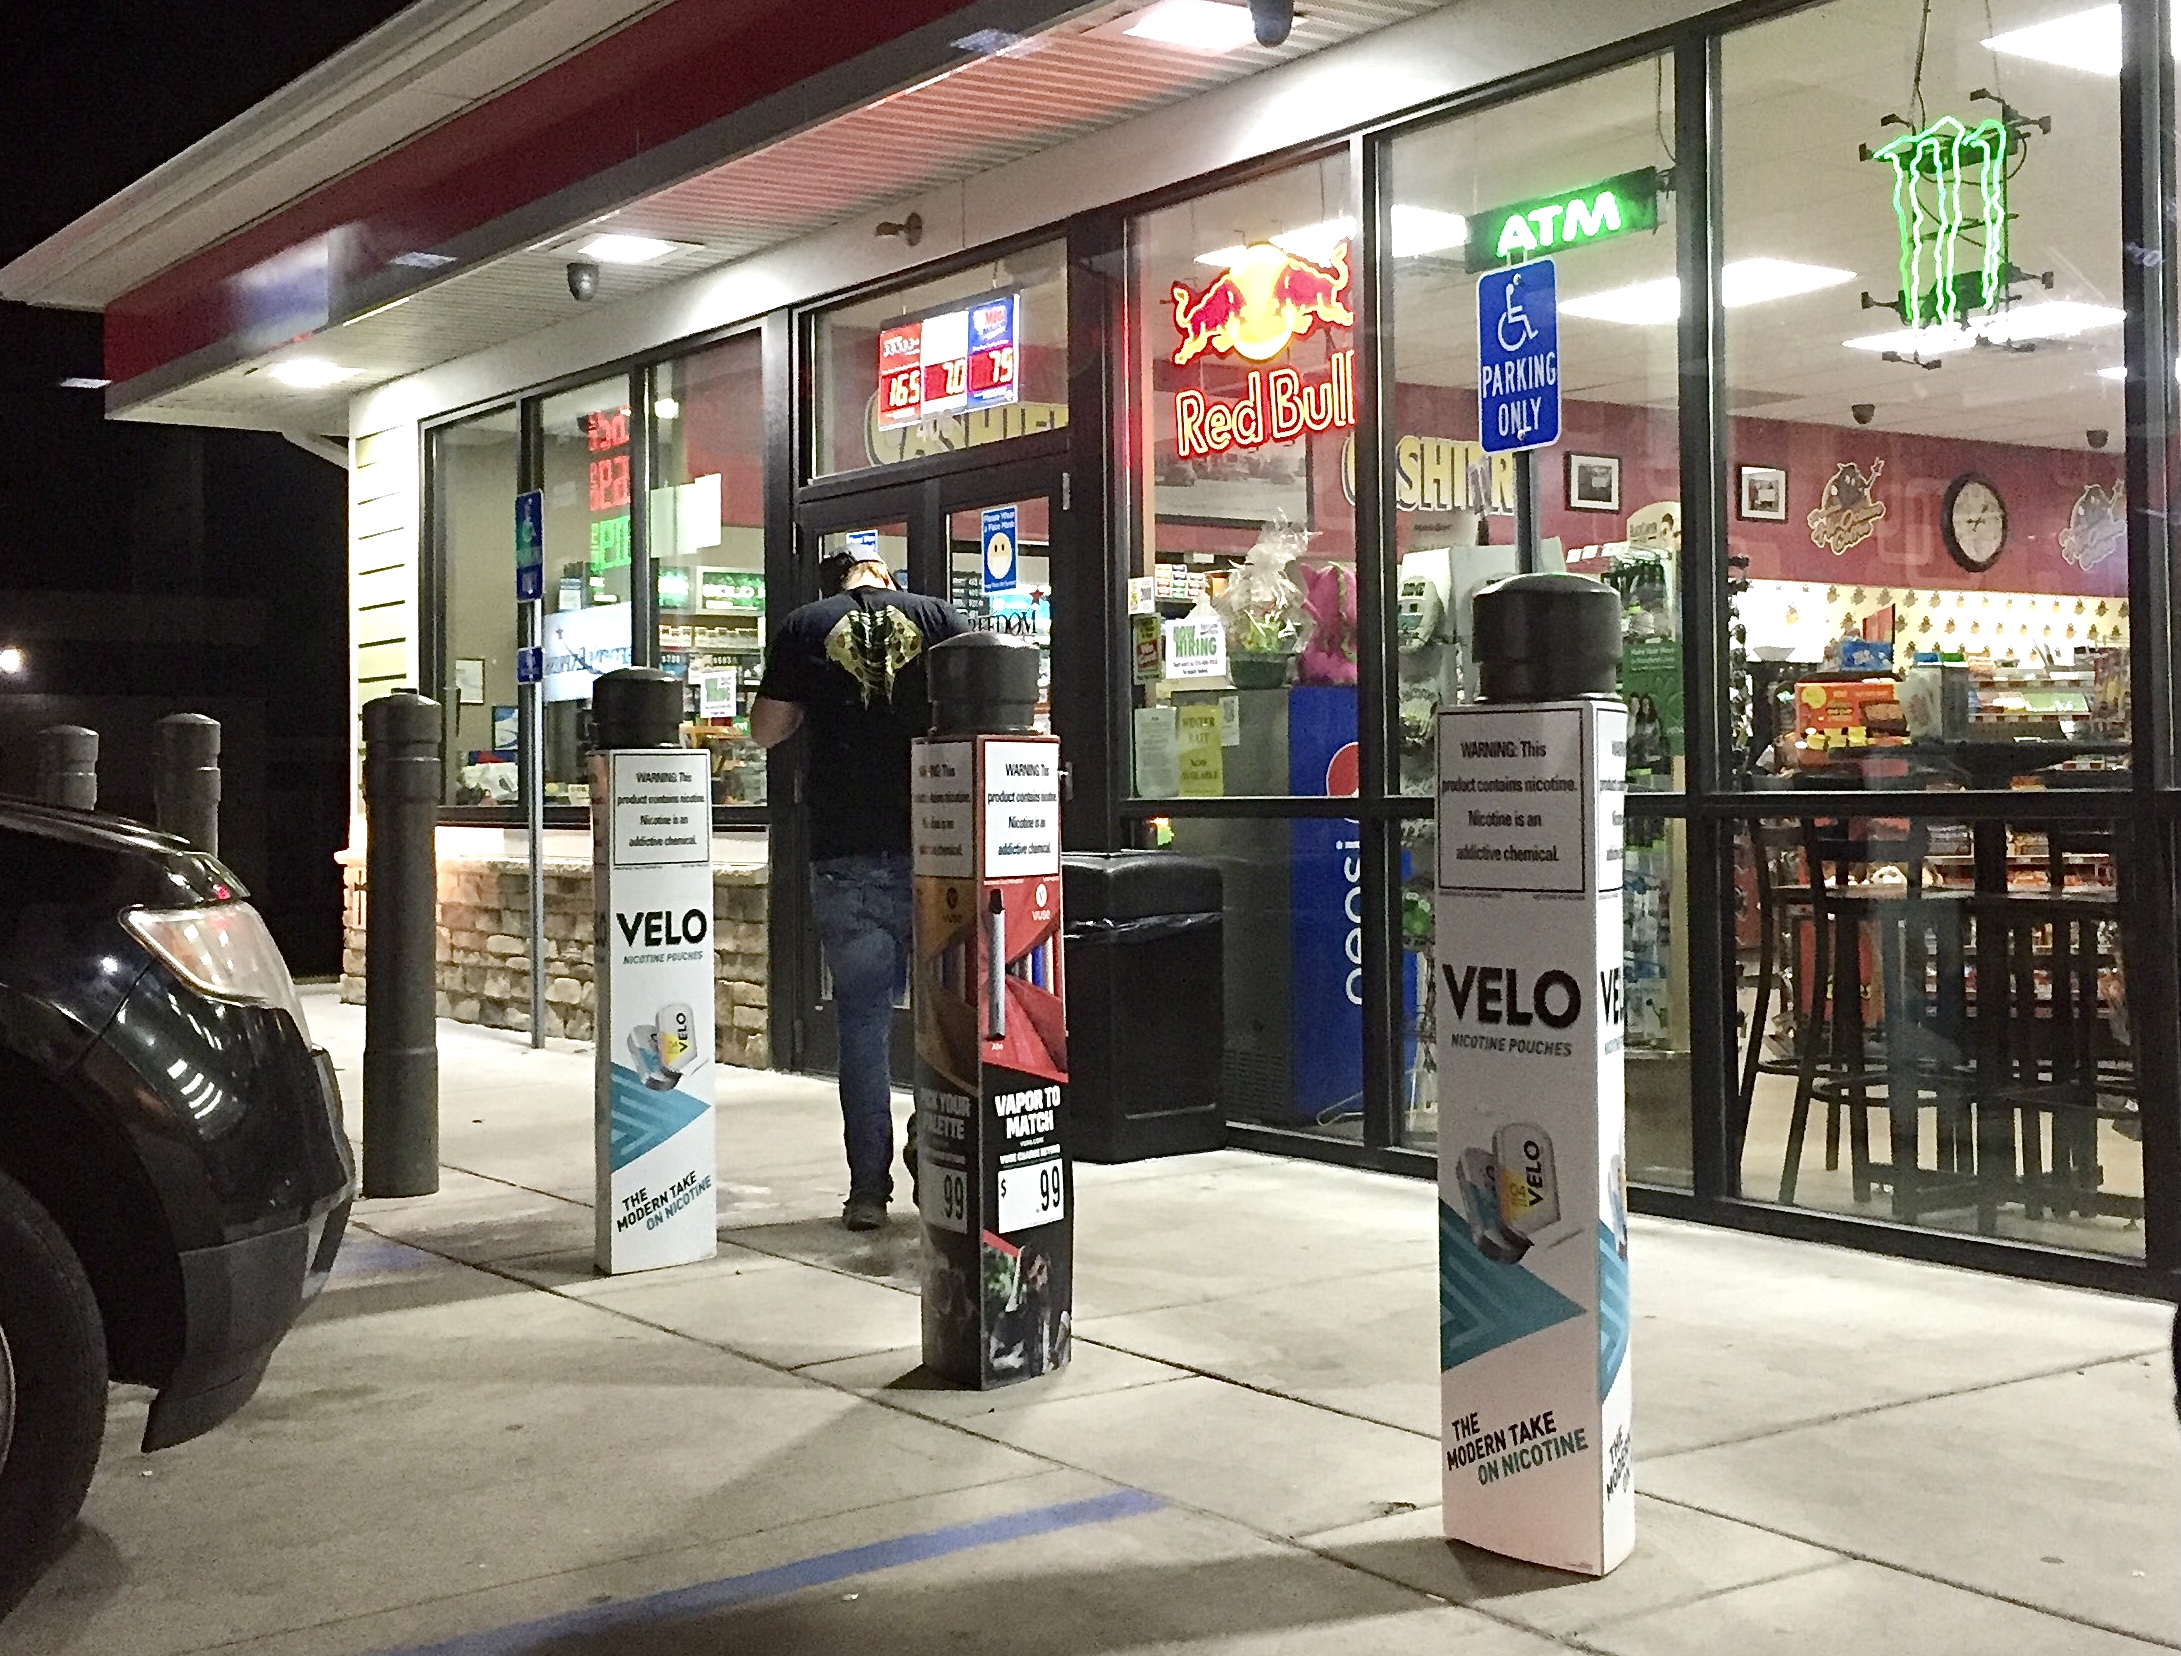 large ads for Velo nicotine pouches outside the store